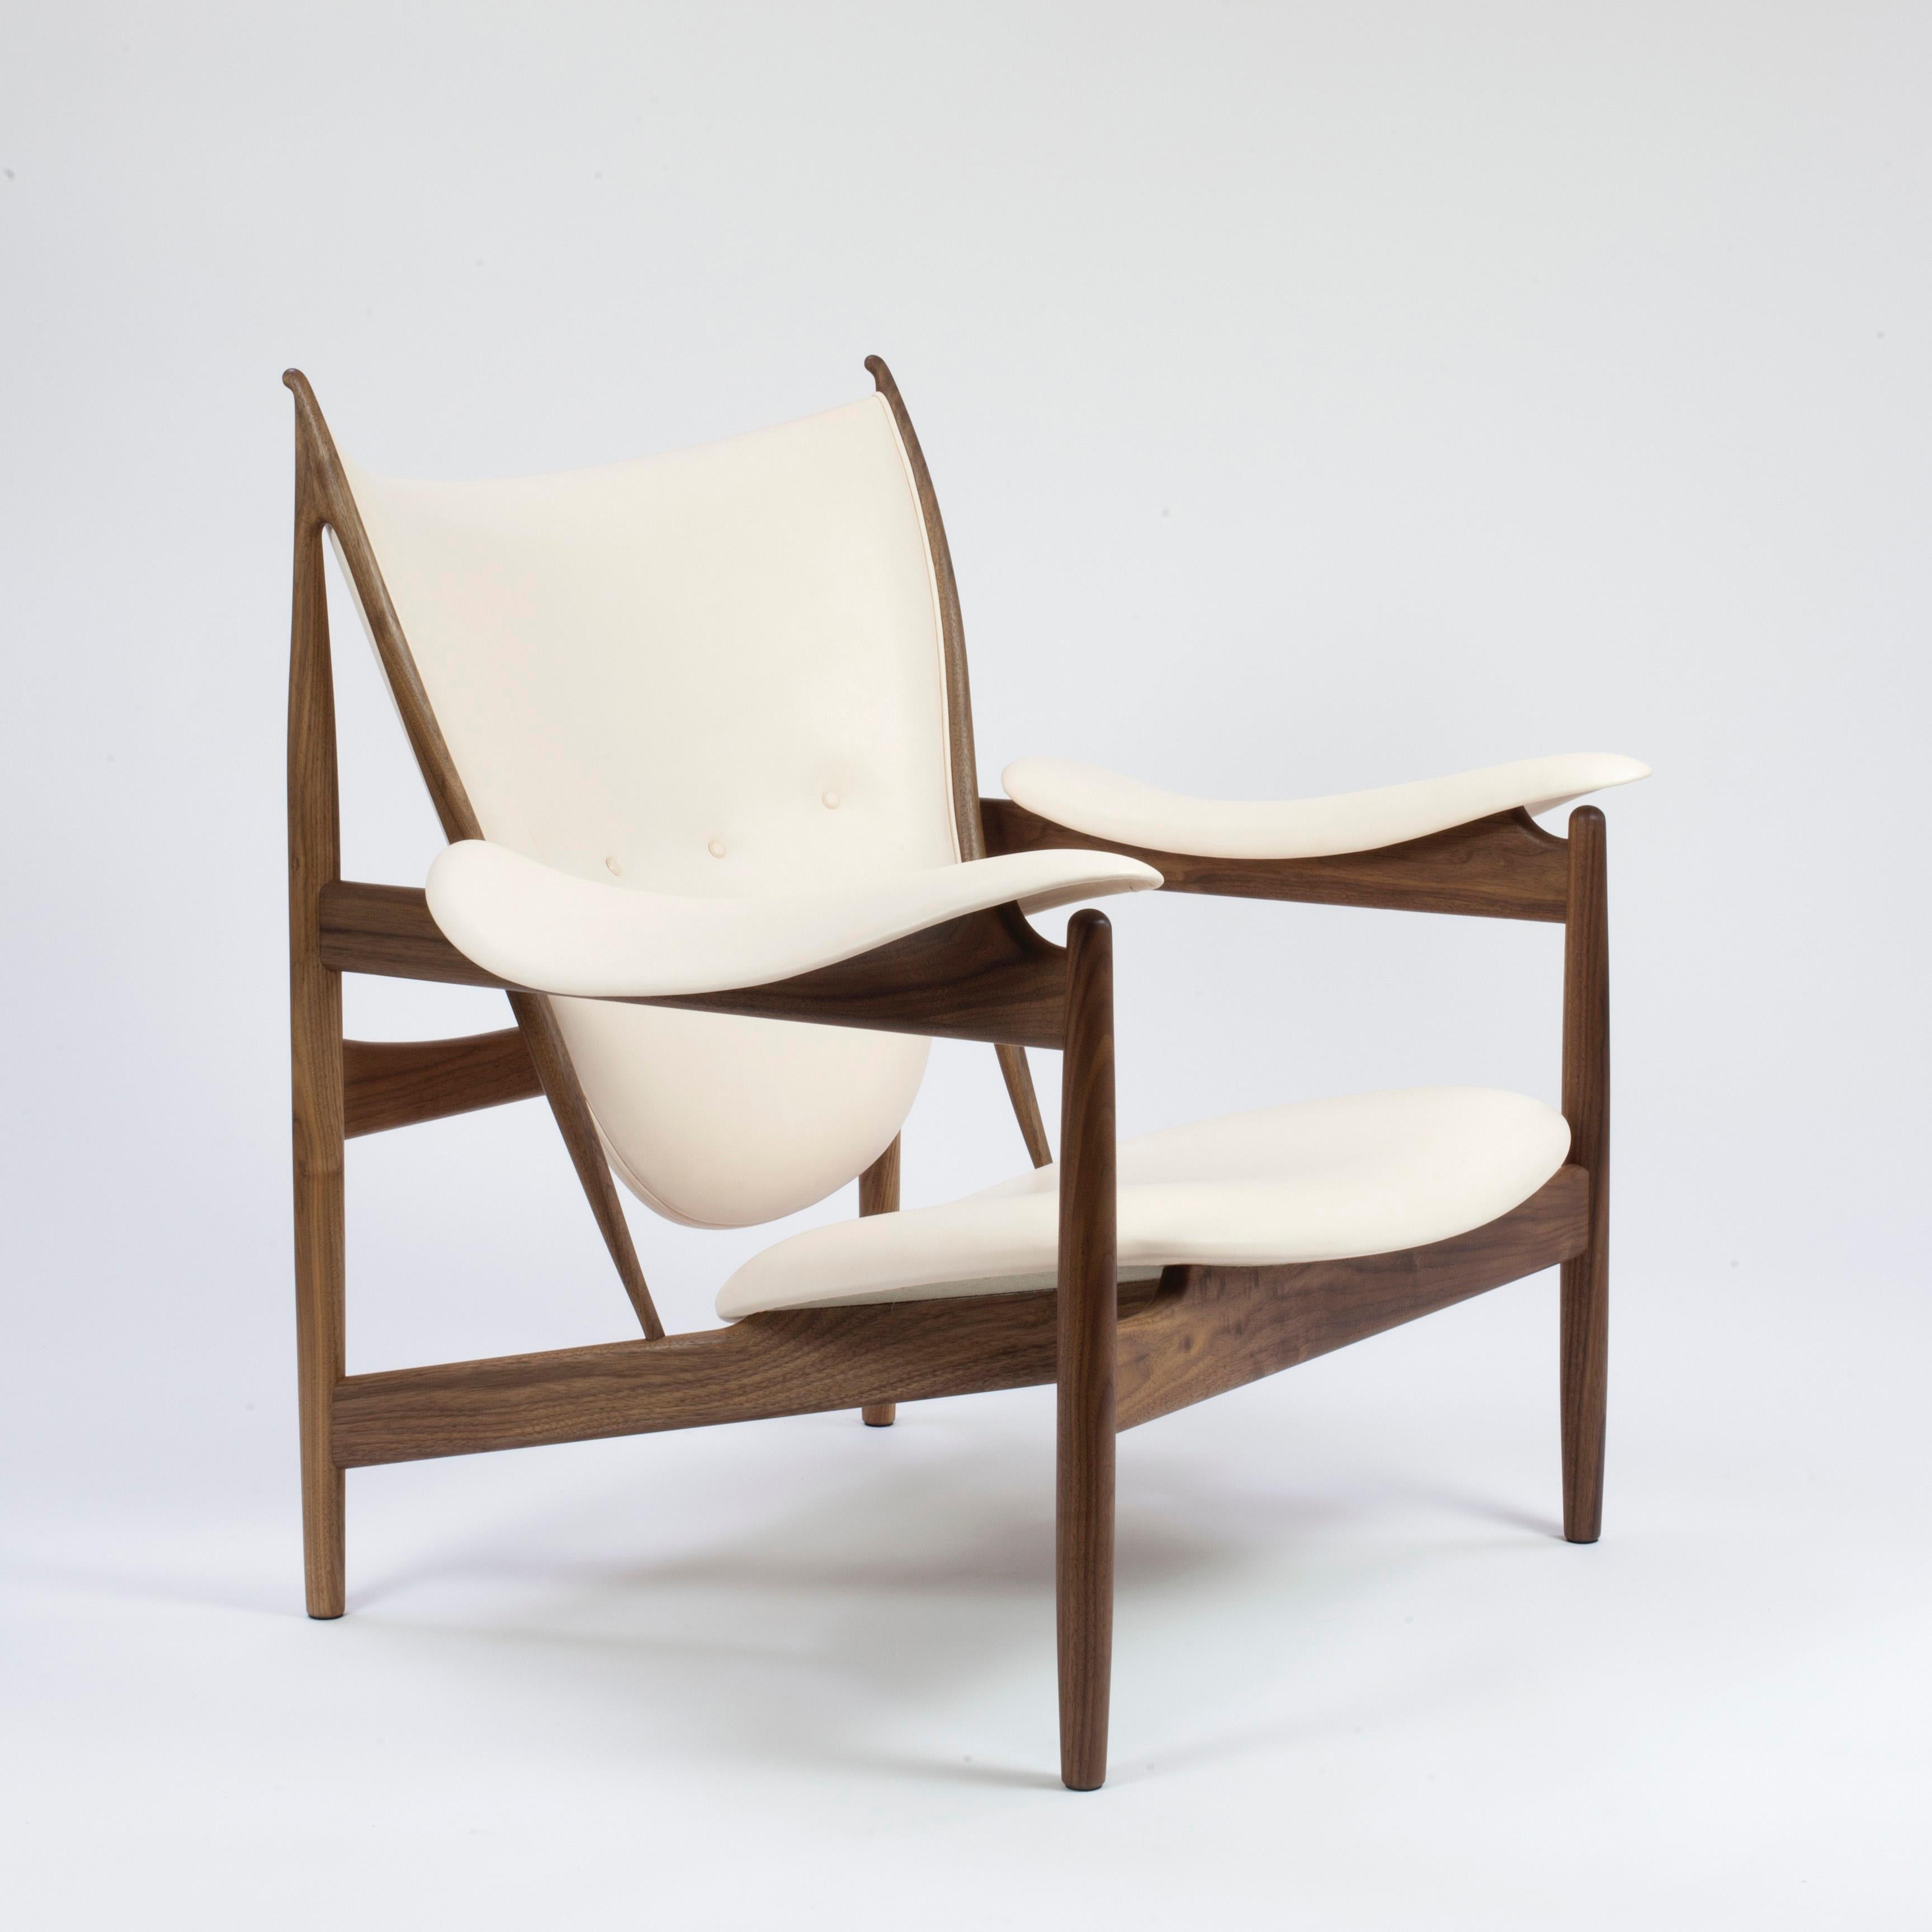 Armchair designed by Finn Juhl
Manufactured by One collection Finn Juhl (Denmark)

The iconic Chieftain chair is one of Finn Juhl’s absolute masterpieces, representing the peak of his career as a furniture designer. At its introduction in 1949,